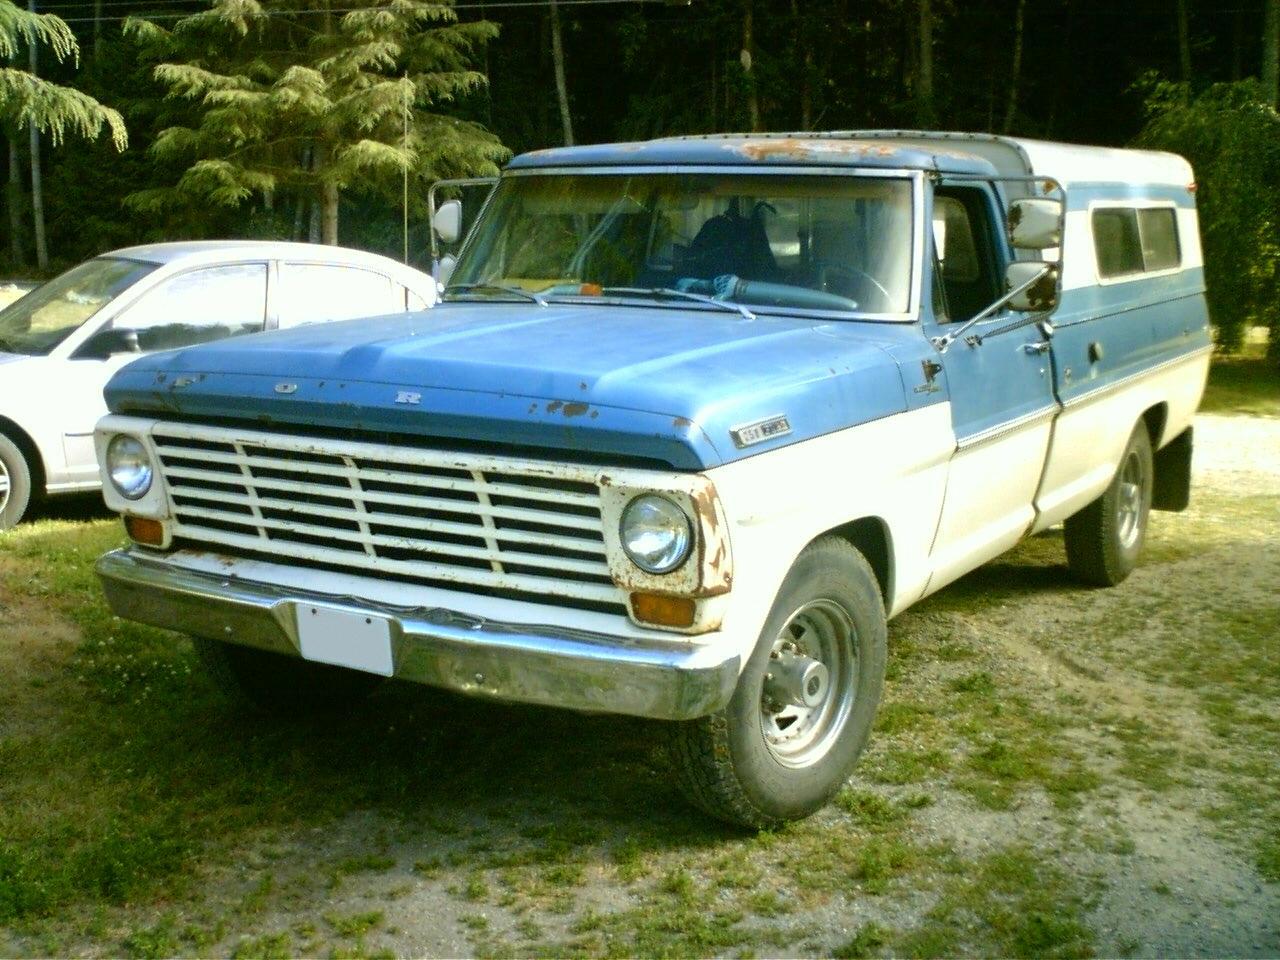  “Highboy” is a nickname given to the Ford F-250s of a specific period.